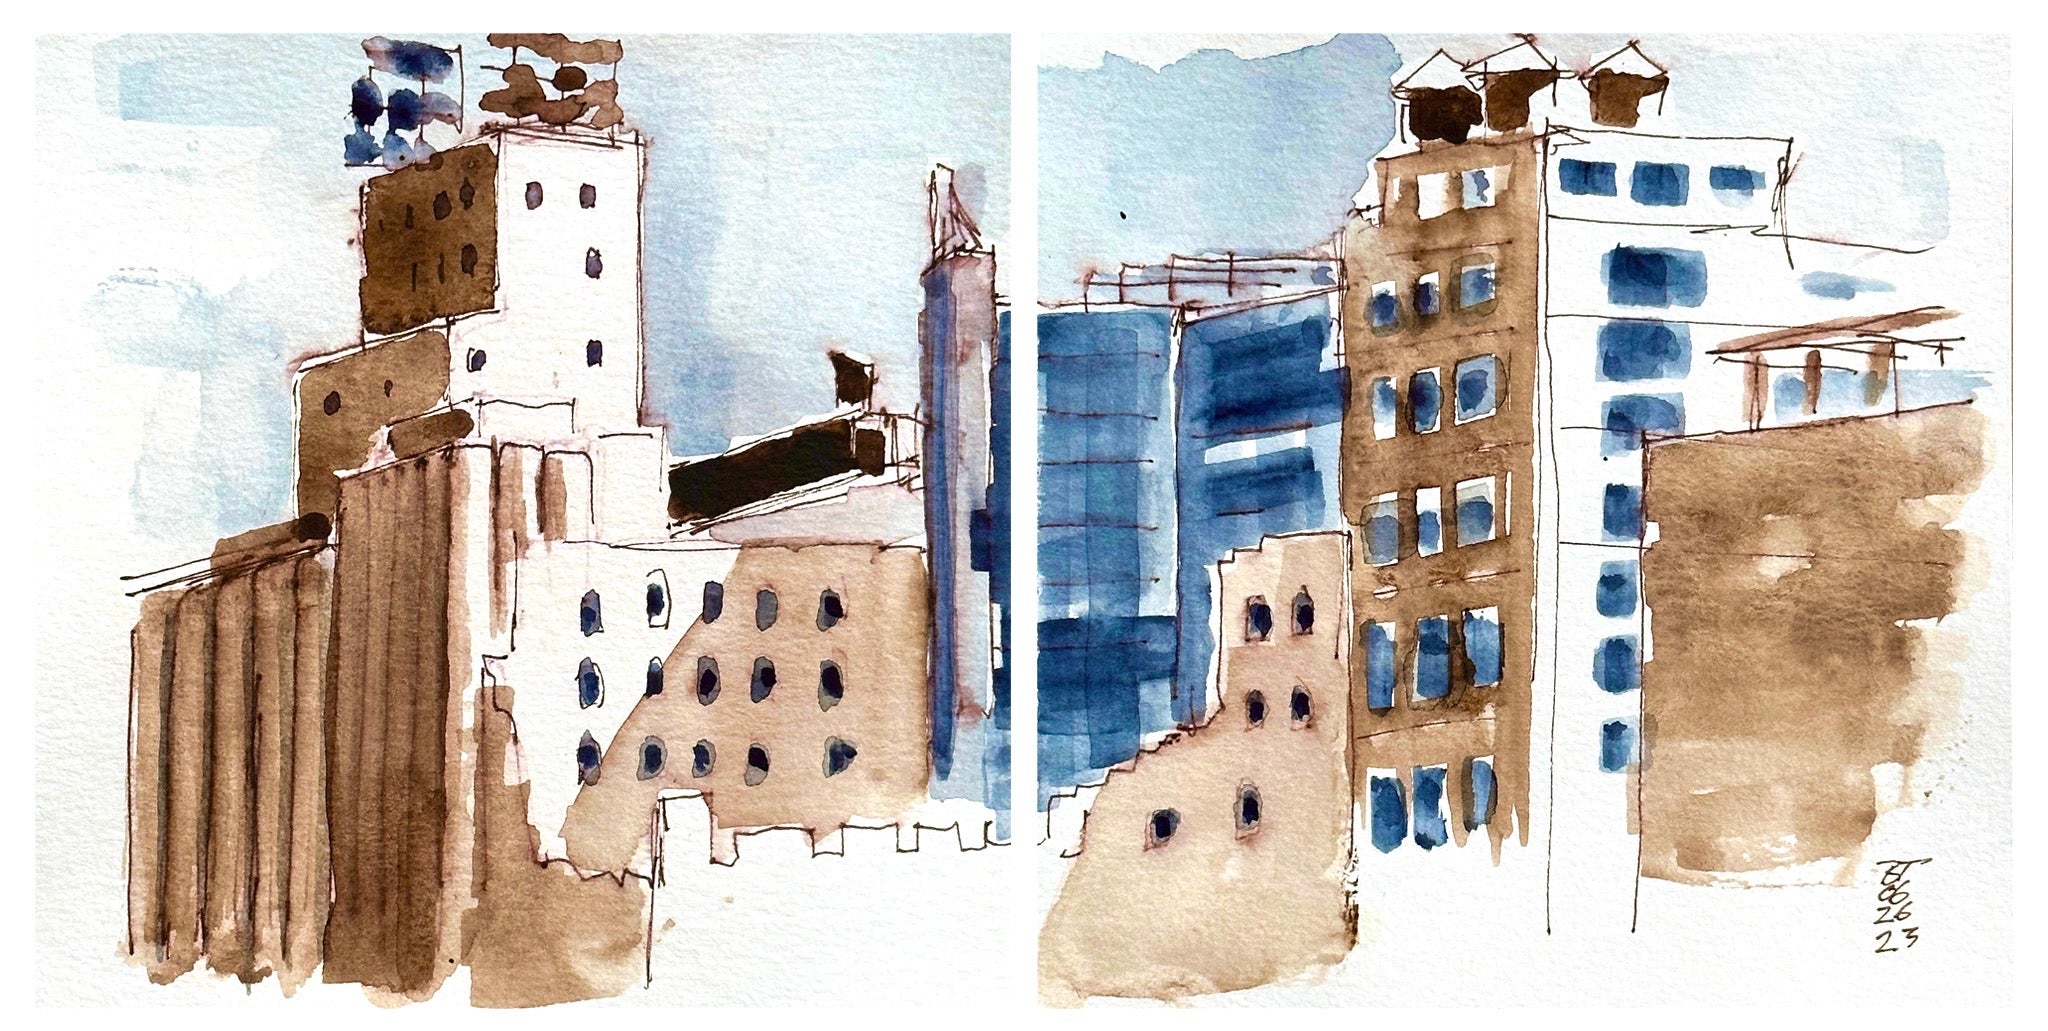 Gold Medal and Mill Ruins (Duo, Diptych), 06.26.23